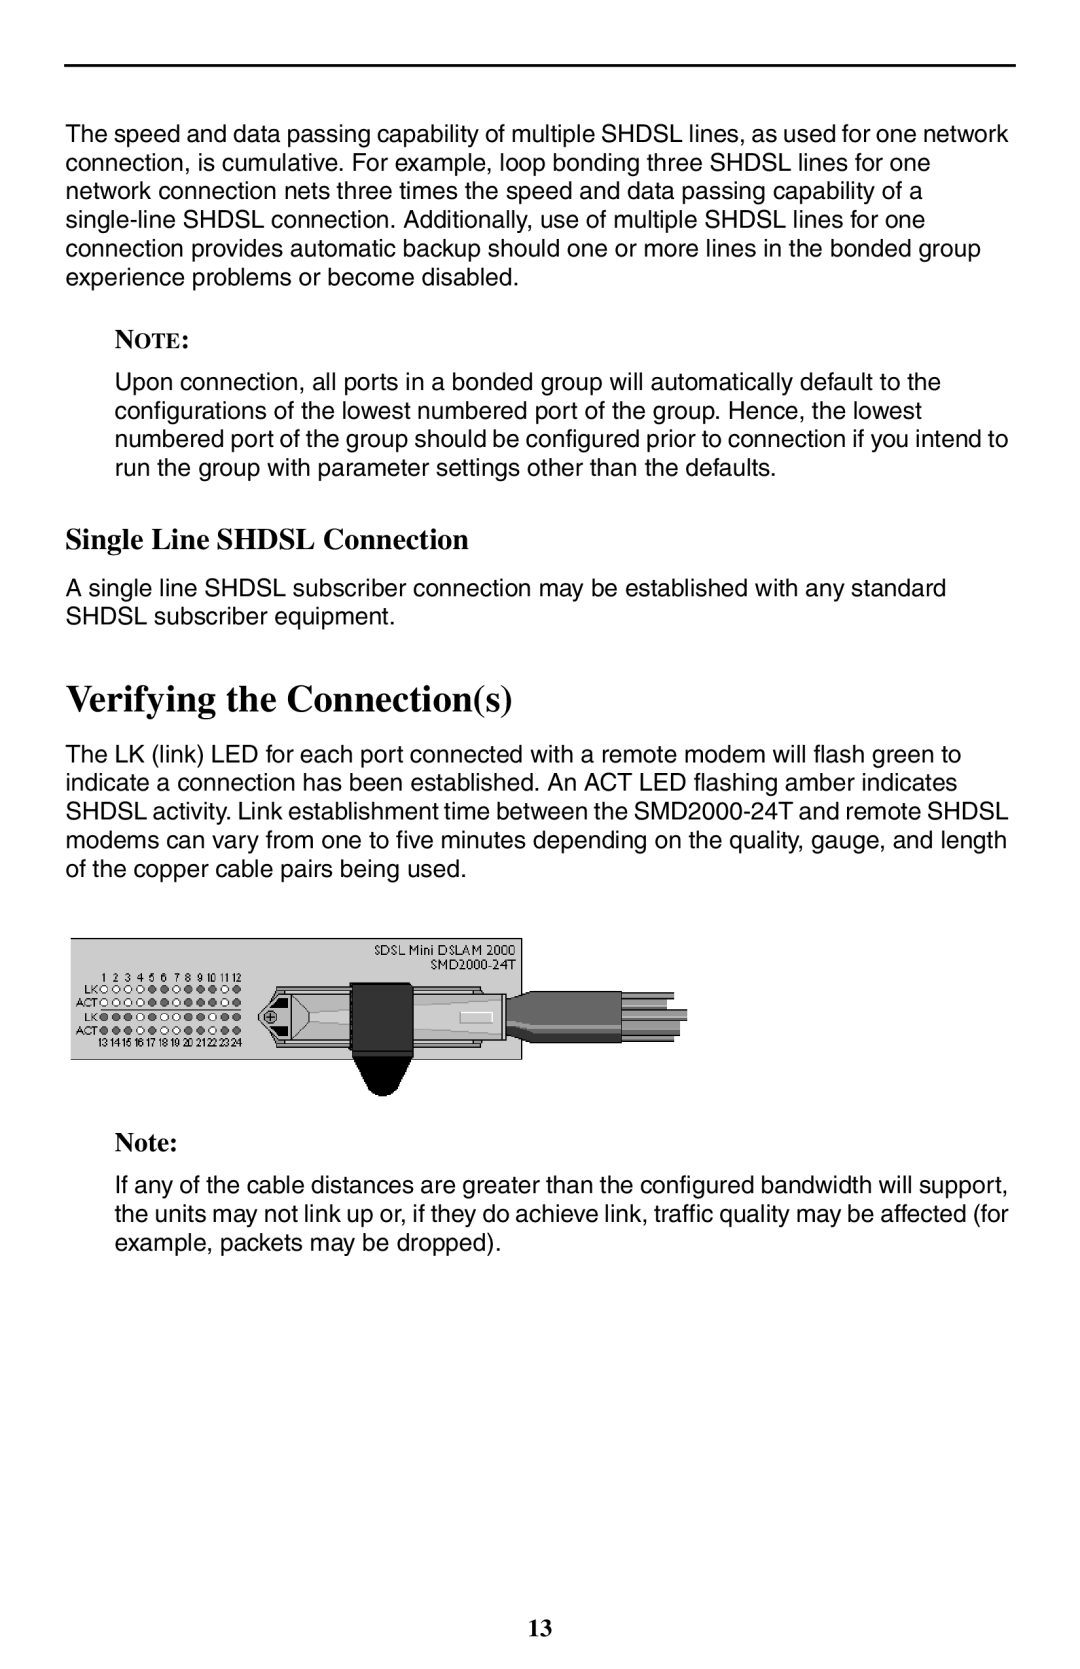 Paradyne SMD2000-24T installation instructions Verifying the Connections, Single Line Shdsl Connection 